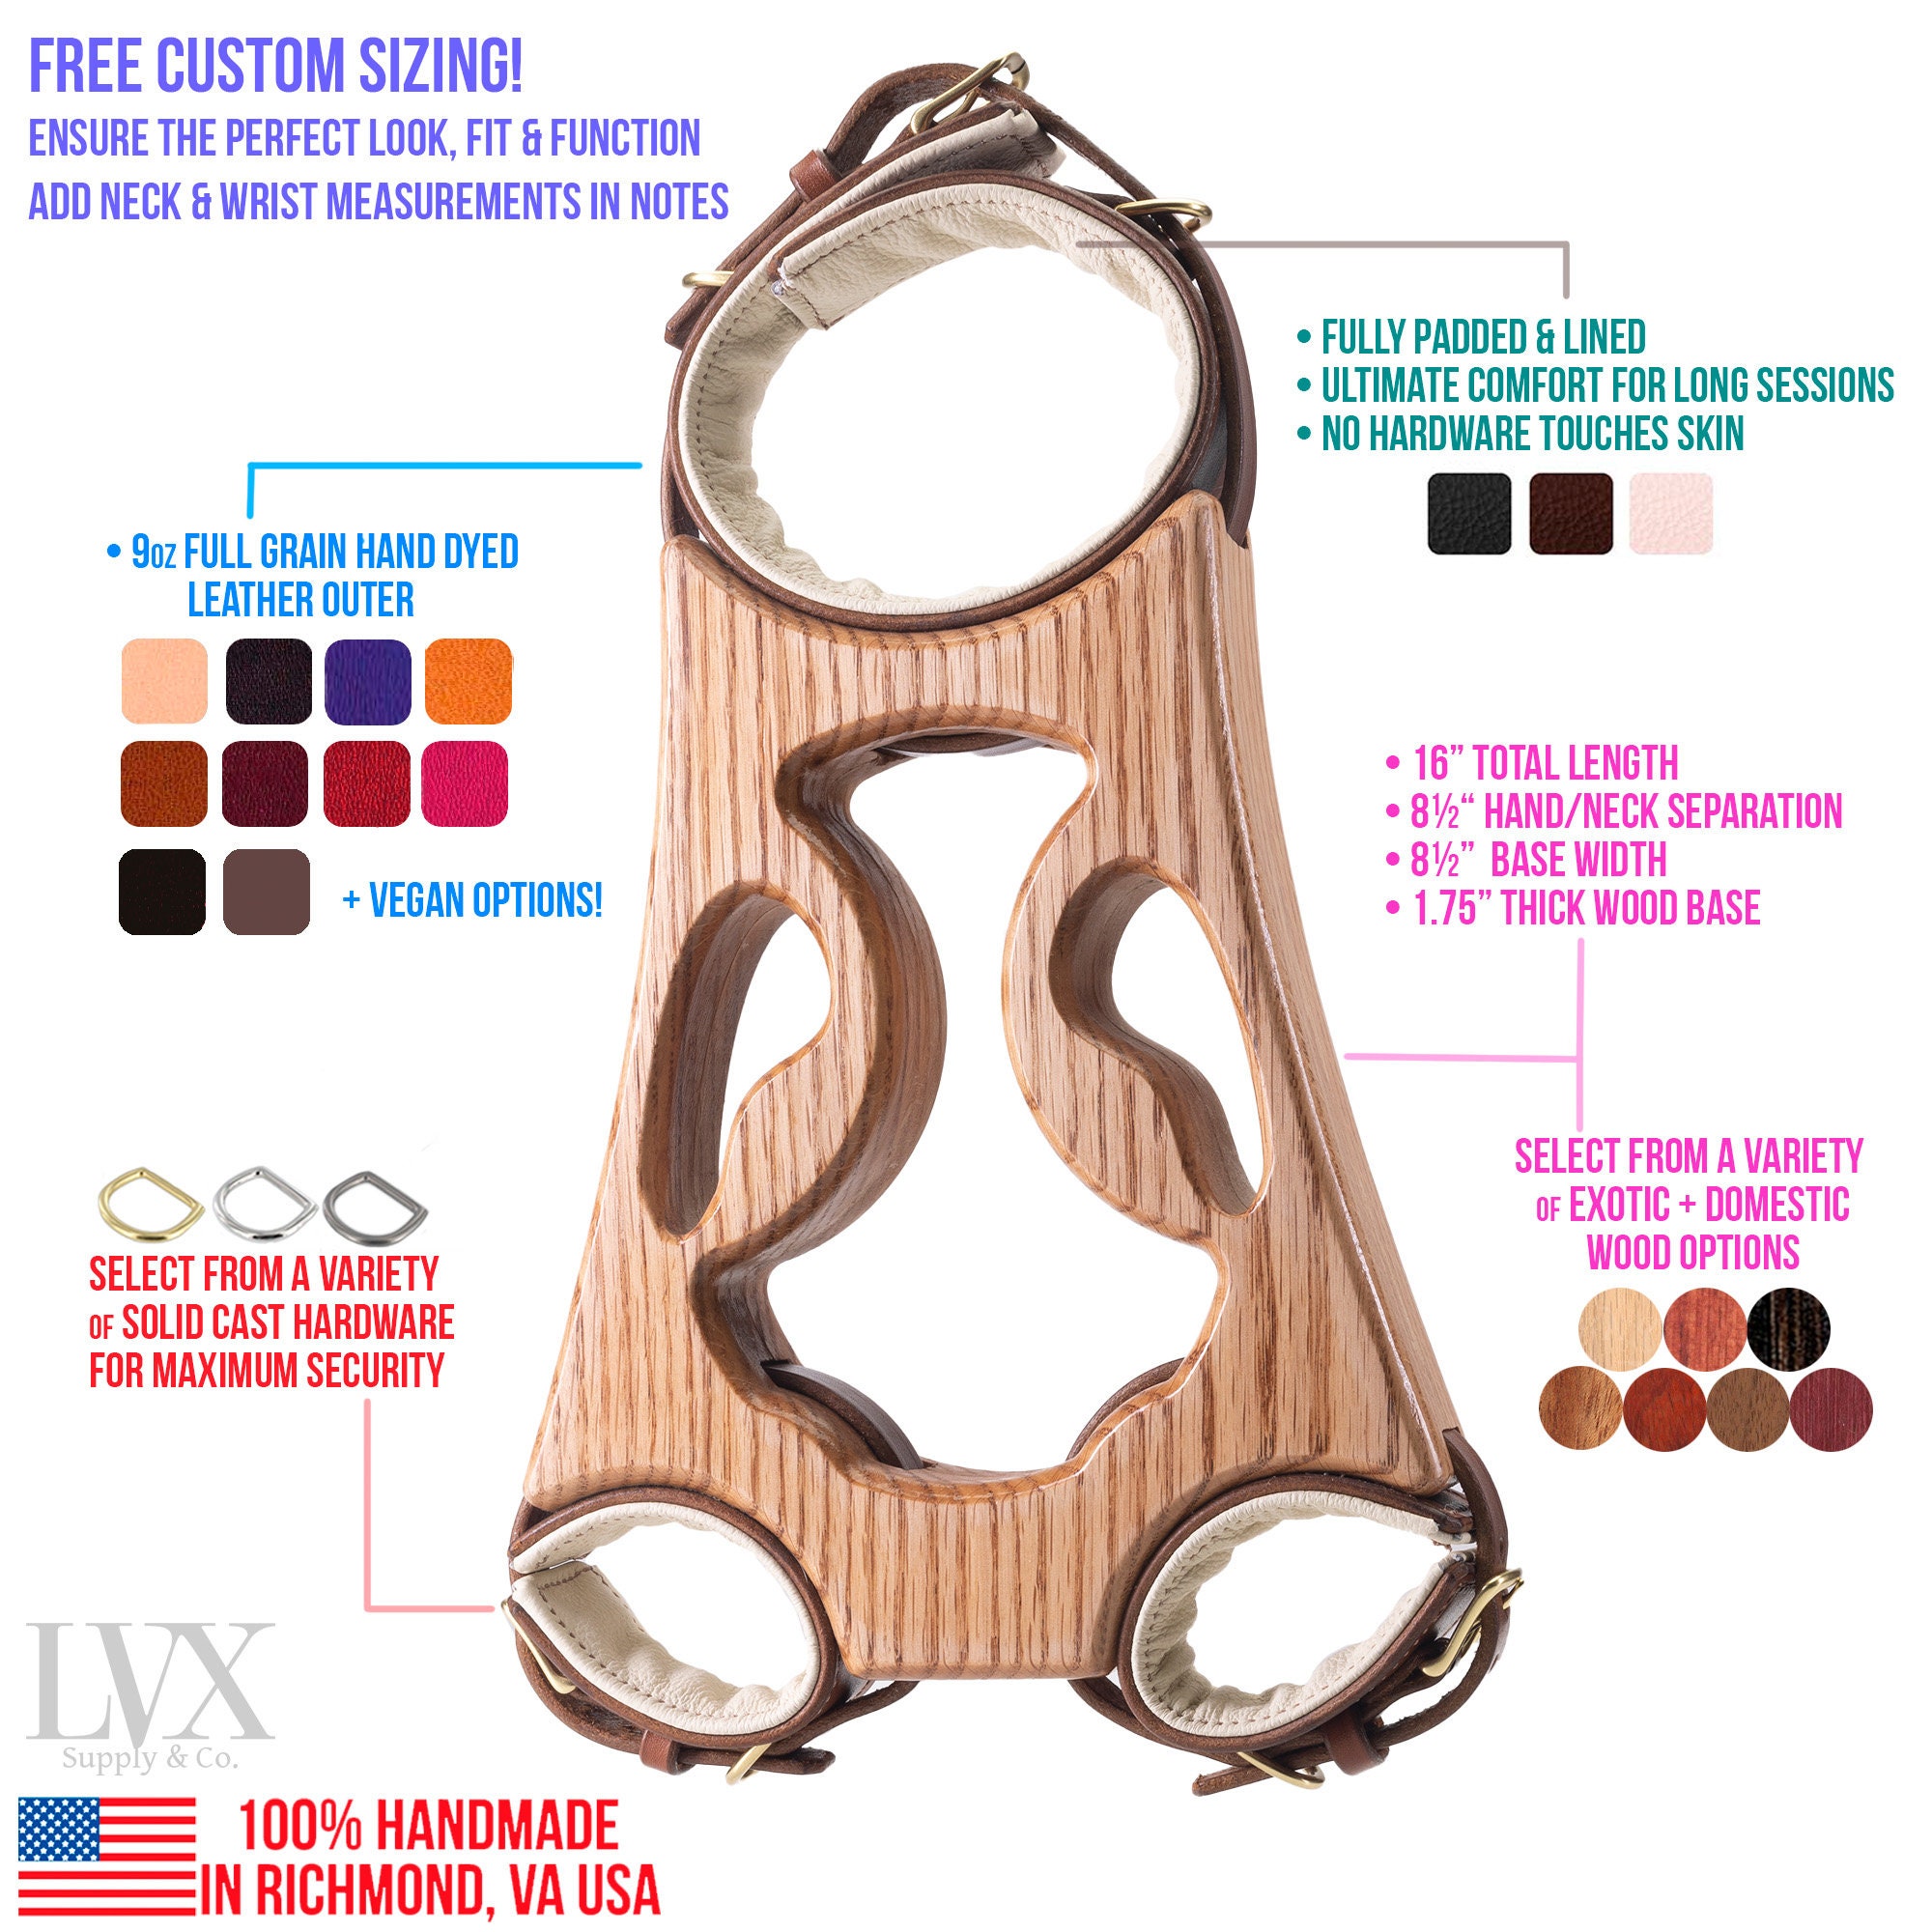 Padded Leather & Wood BDSM Fiddle | Submissive Pillory Slave Dungeon Stocks Leather Bondage Torture Device | BDSM Furniture by LVX Supply photo